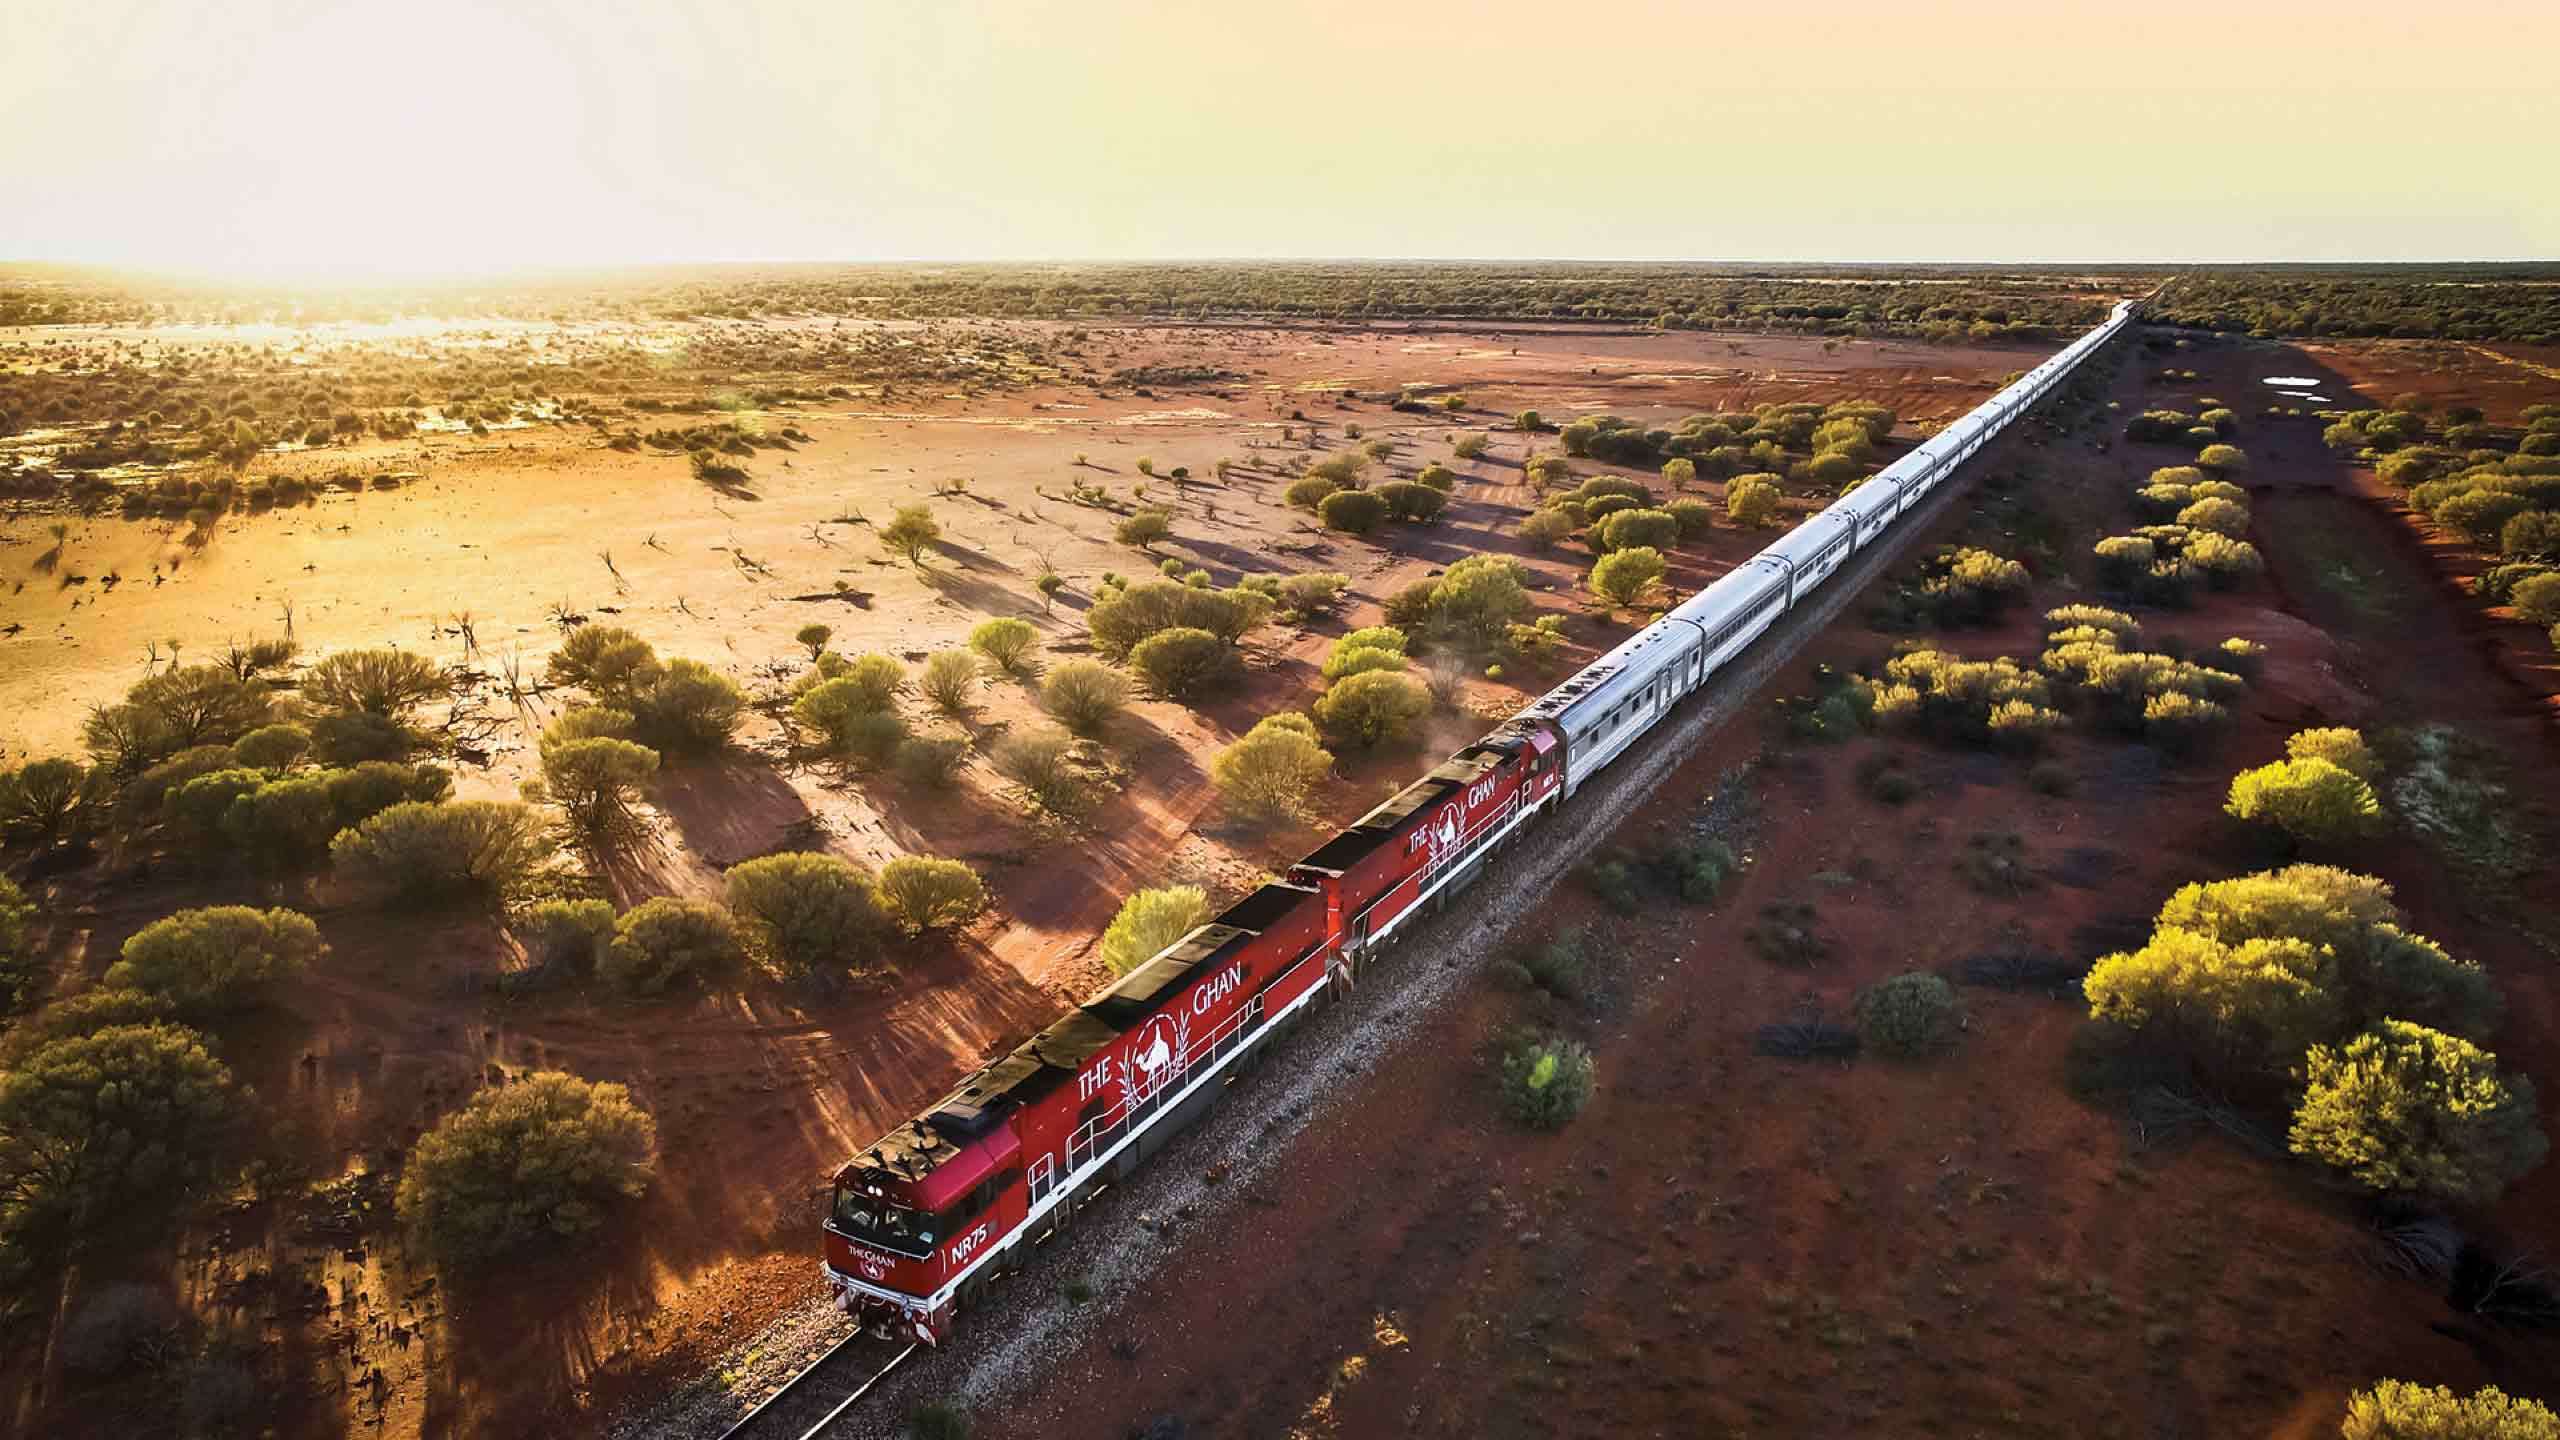 “THE GHAN” Outback Rail Journey (Alice Springs to Adelaide) 2D1N